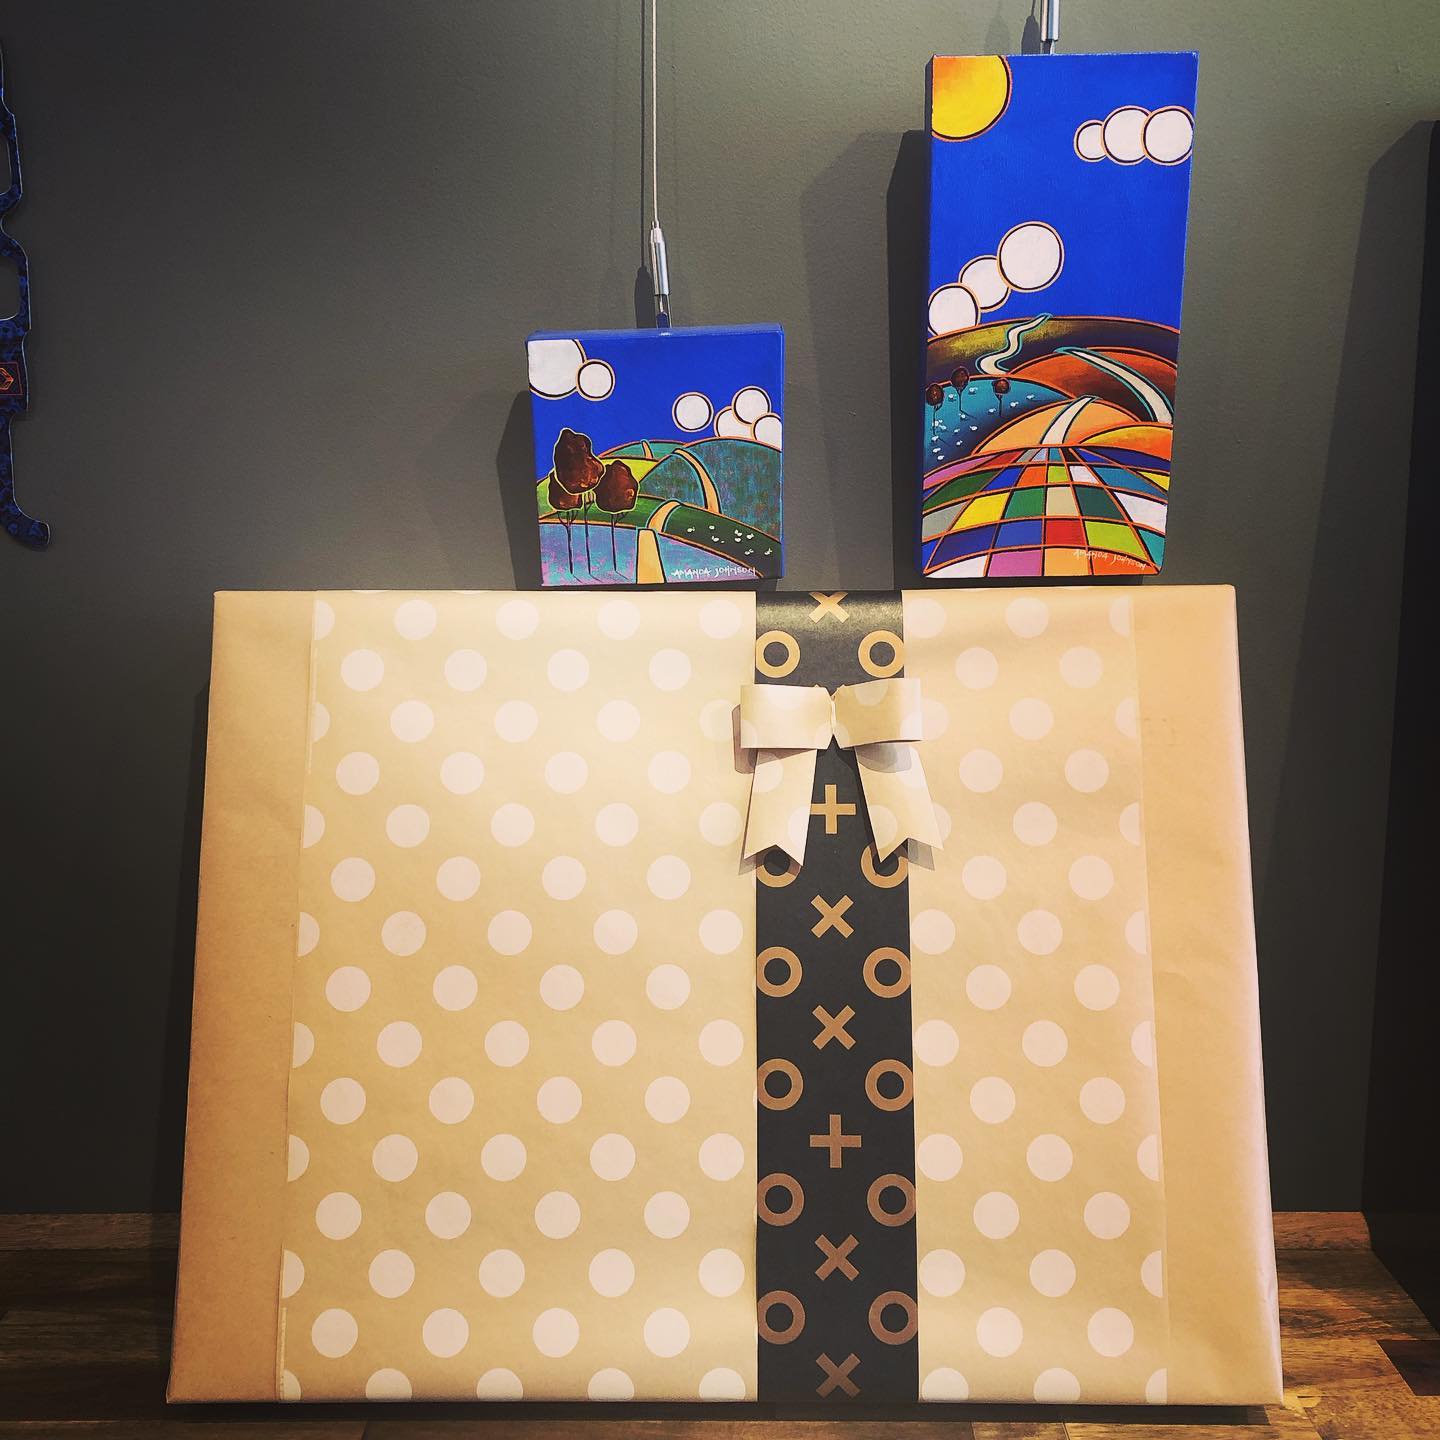 A gift wrapped painting sits below 2 of Amanda's original works in the gallery space at WNA